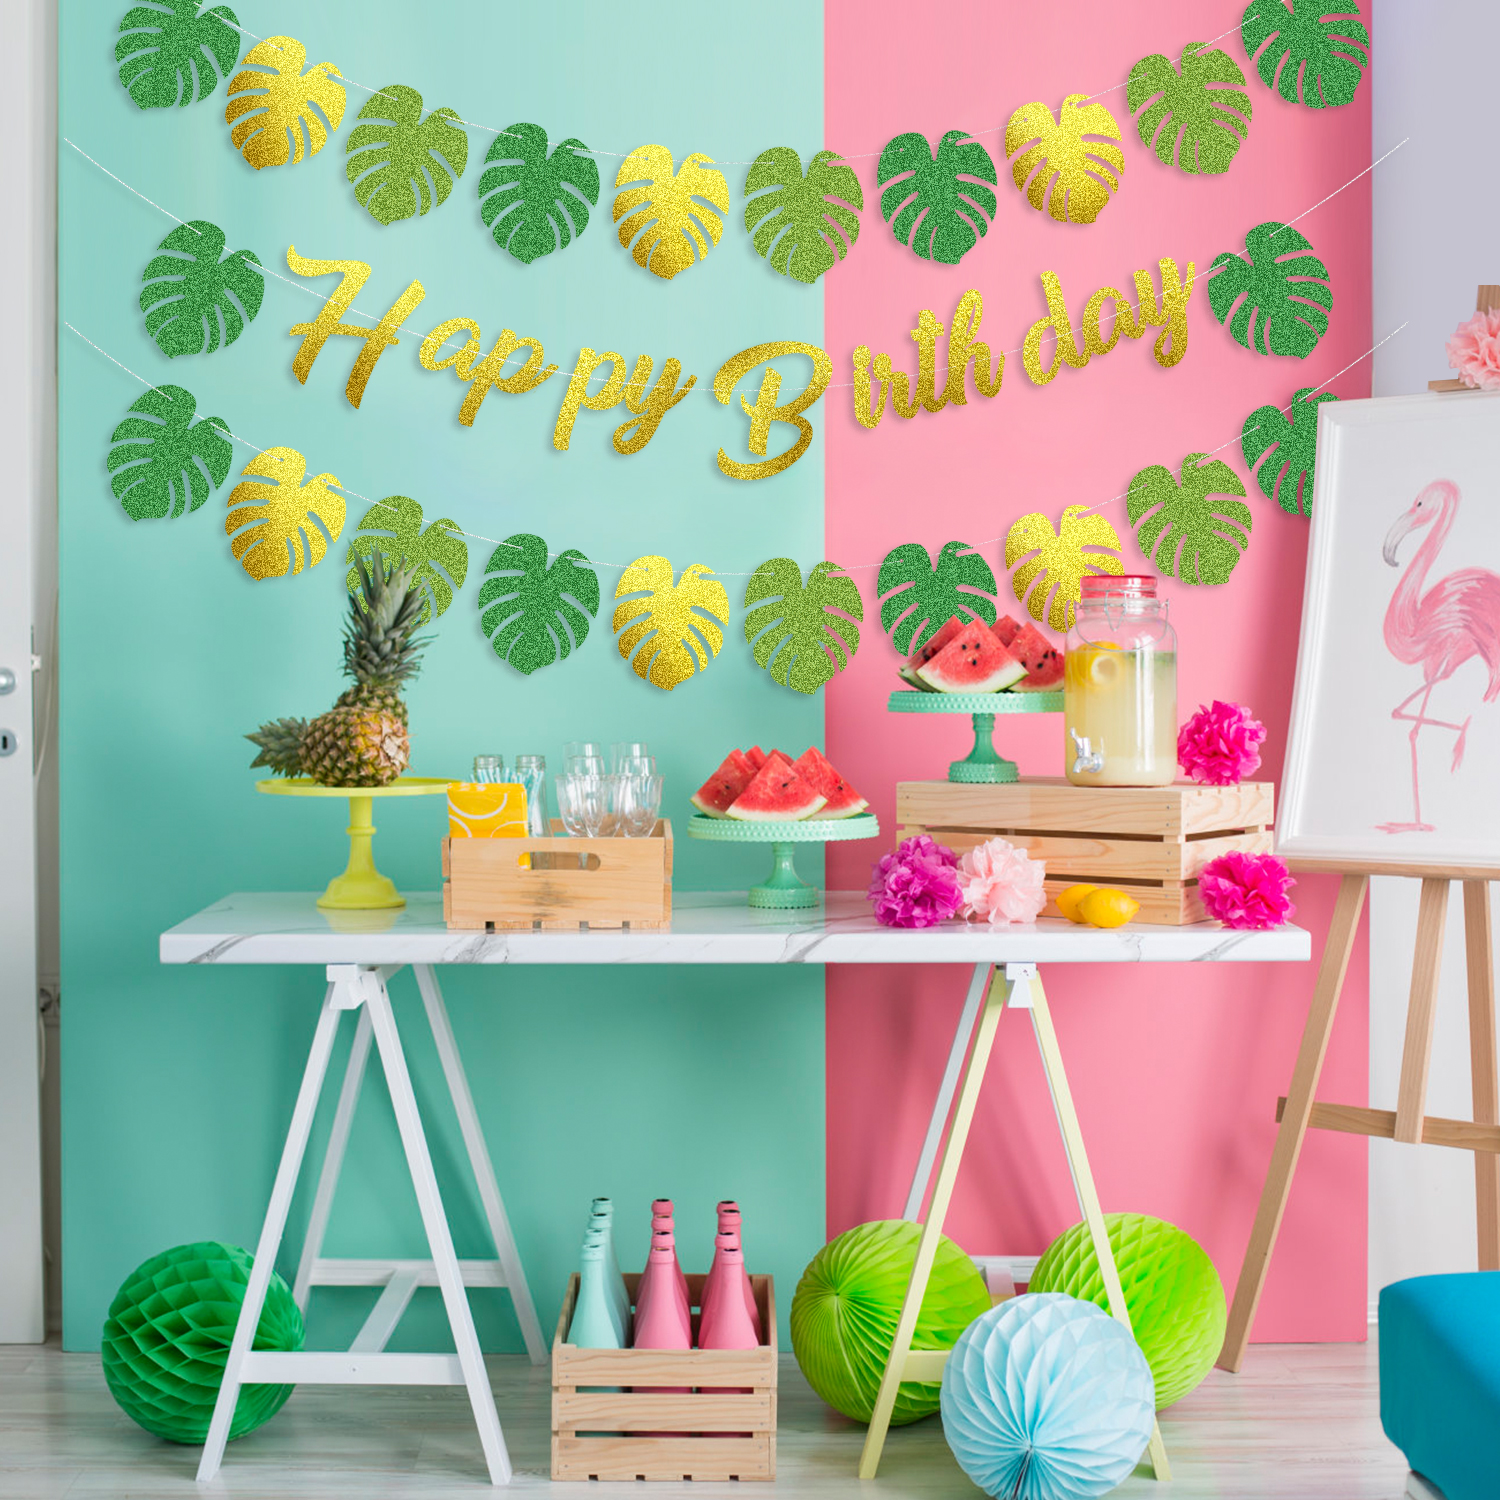 Tropical Birthday Party Decorations - 3 Set Hawaiian Happy Birthday Banners, Gold and Green Glittery Tropical Palm Leaf Garland, Summer Jungle Beach Luau Hawaiian Birthday Party Decorations - image 5 of 8